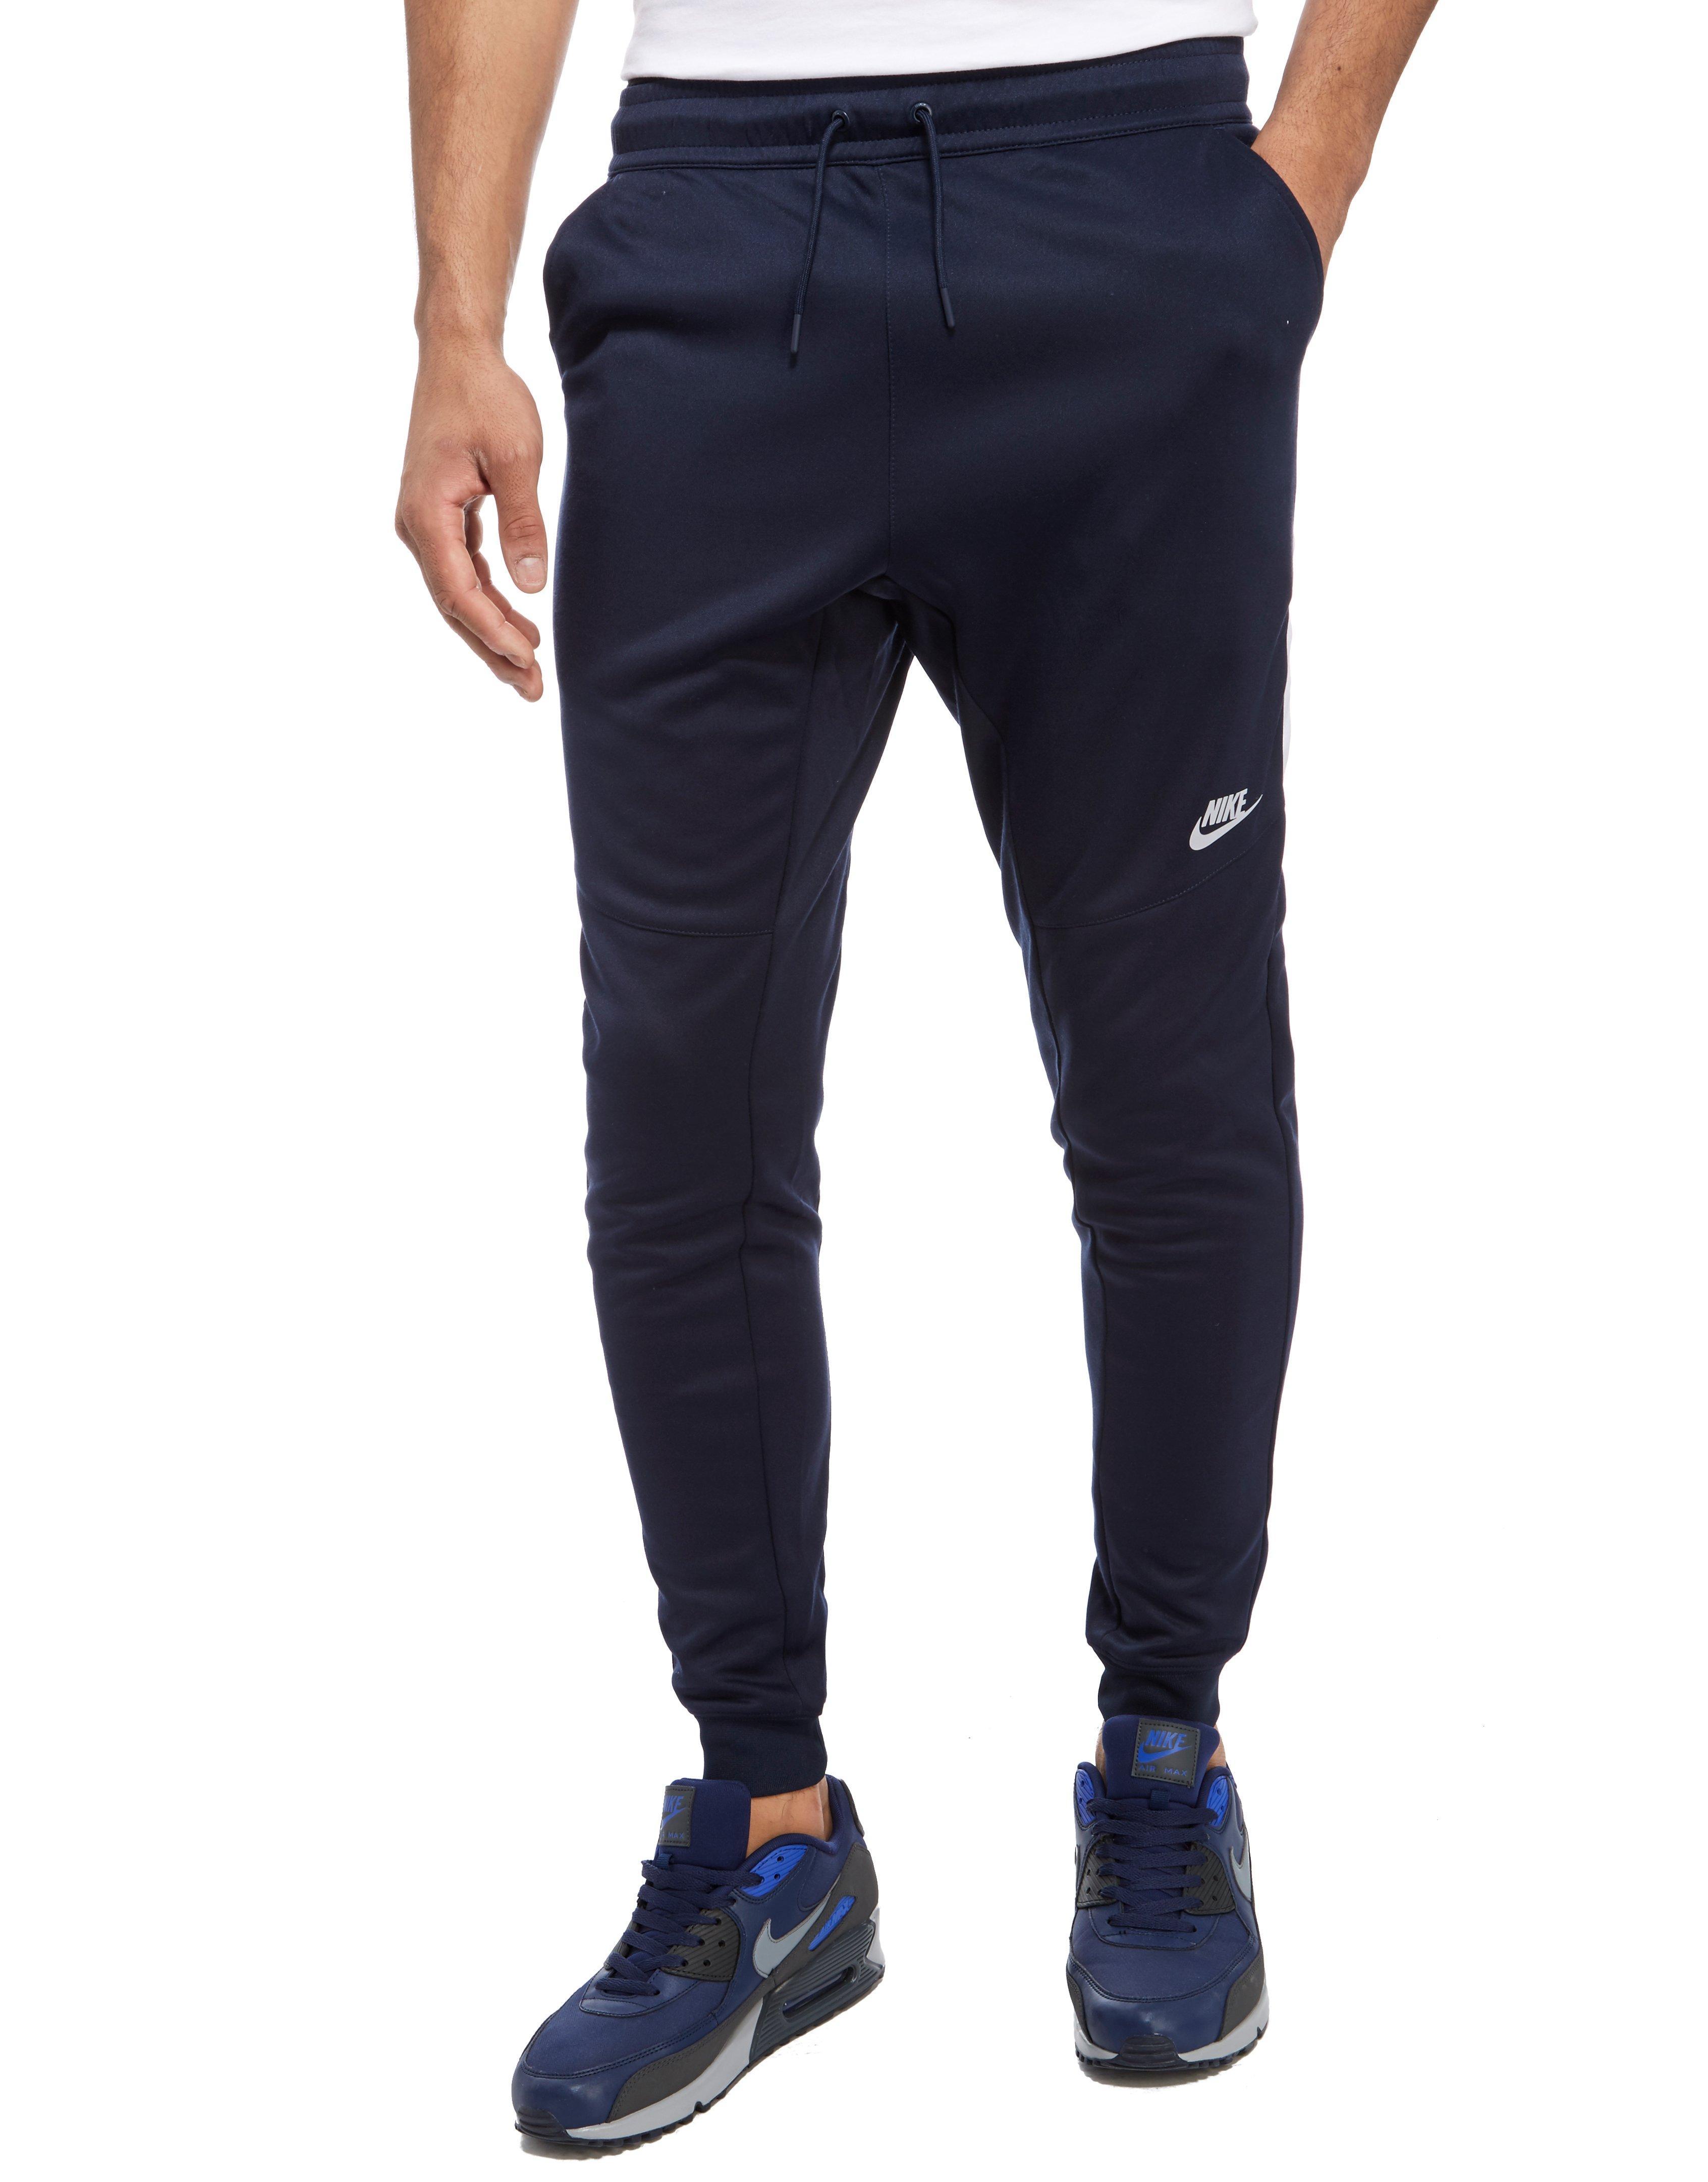 Lyst - Nike Tribute Track Pants in Blue for Men